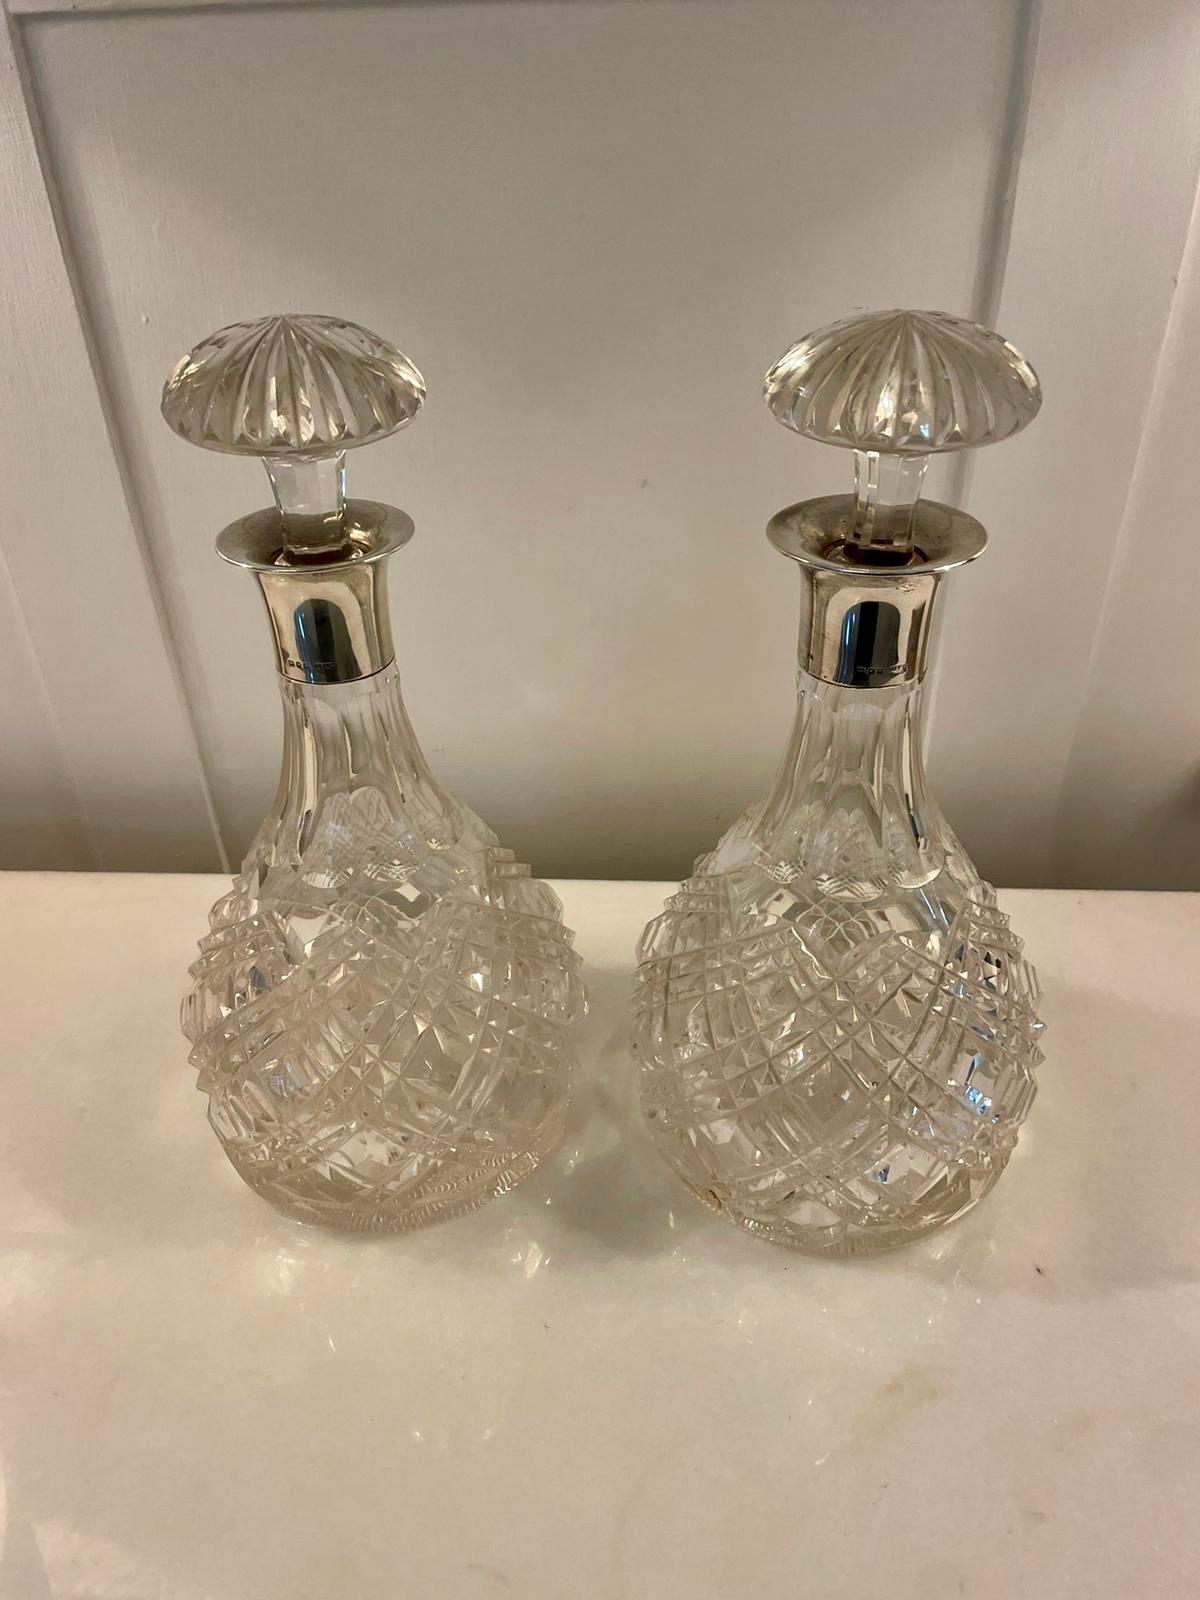 English Superb Quality Pair of Antique Edwardian Cut Glass Decanters with Silver Mounts  For Sale